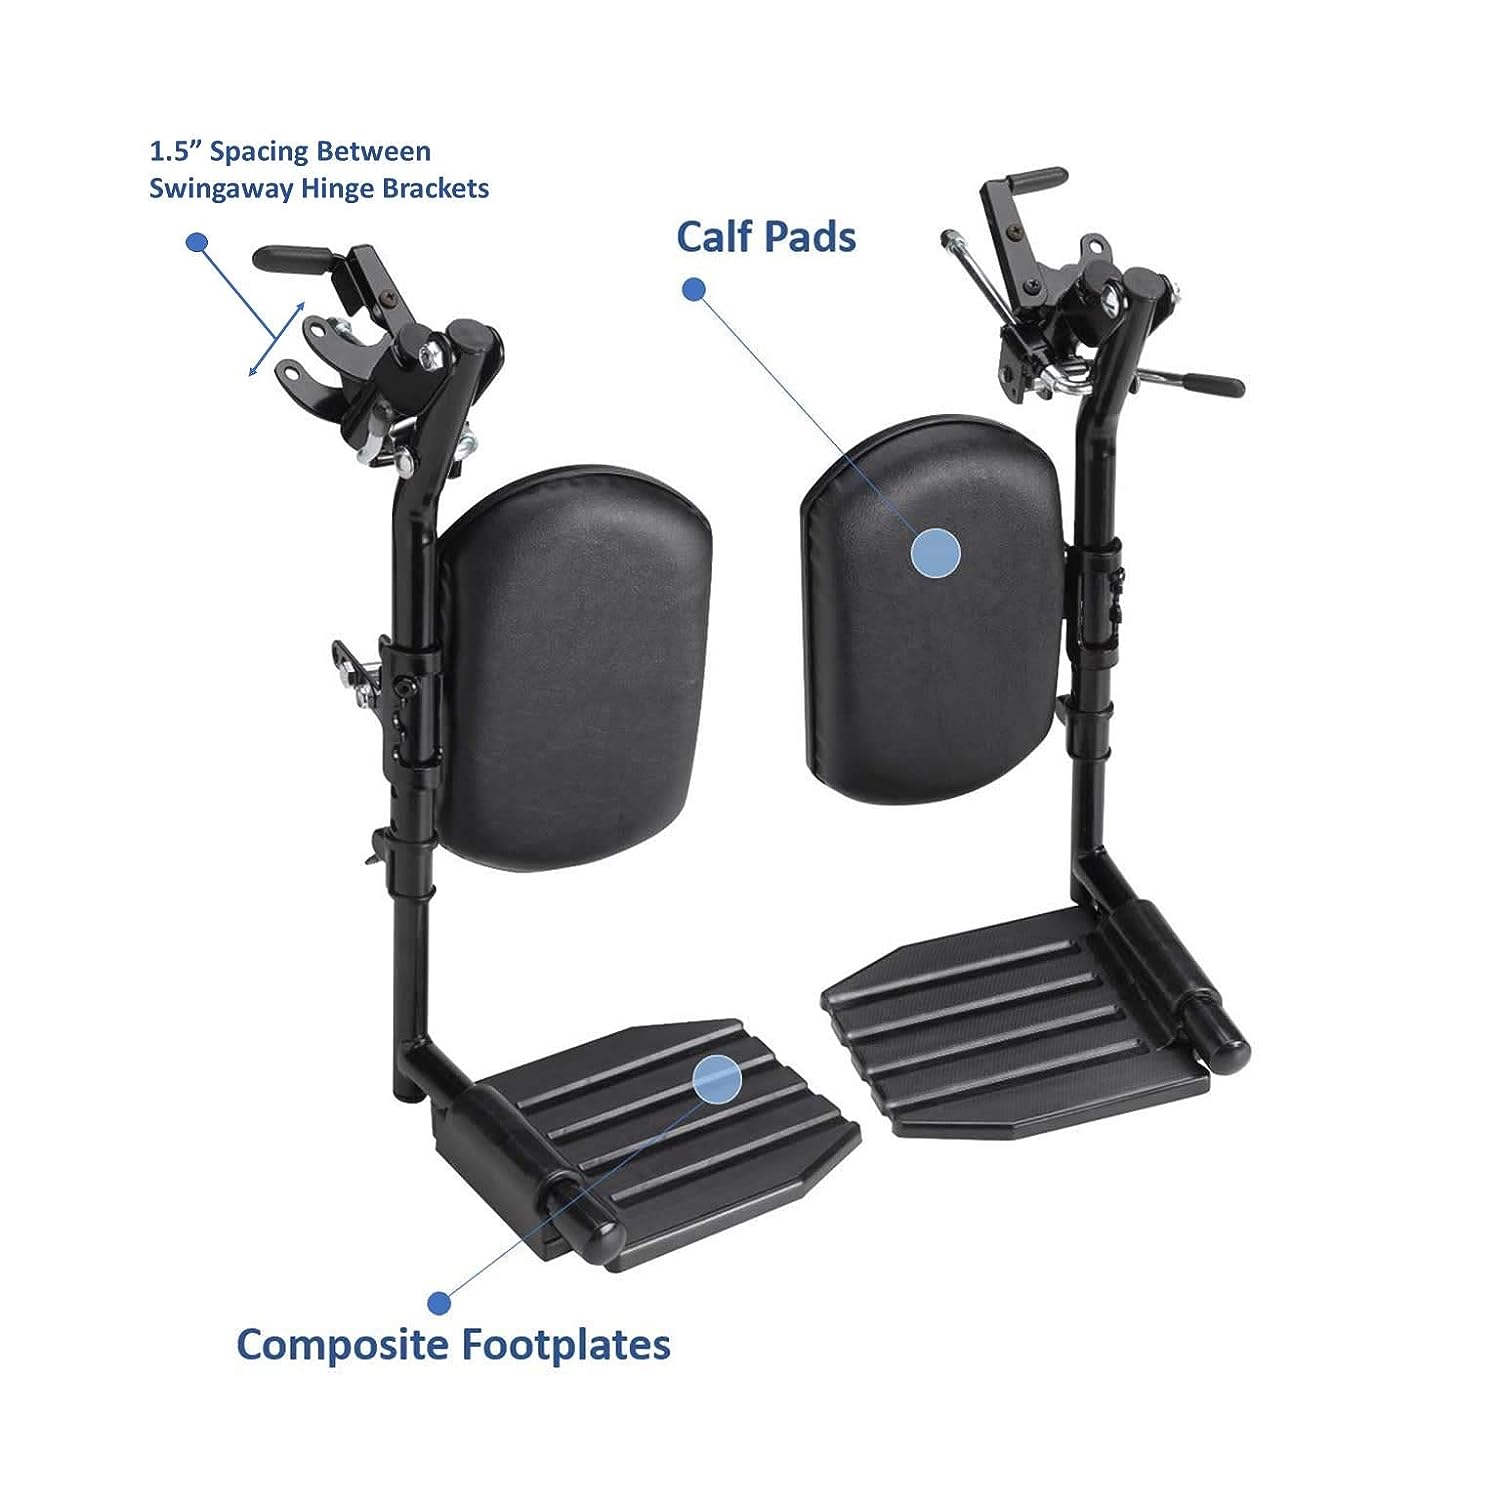 Item T94HCP, a pair of Invacare wheelchair elevating legrest with composite footplates and padded claf pads featured on an Invacare wheelchair to show the compatibility is designed for Invacare wheelchairs only. The Image is against a white background.